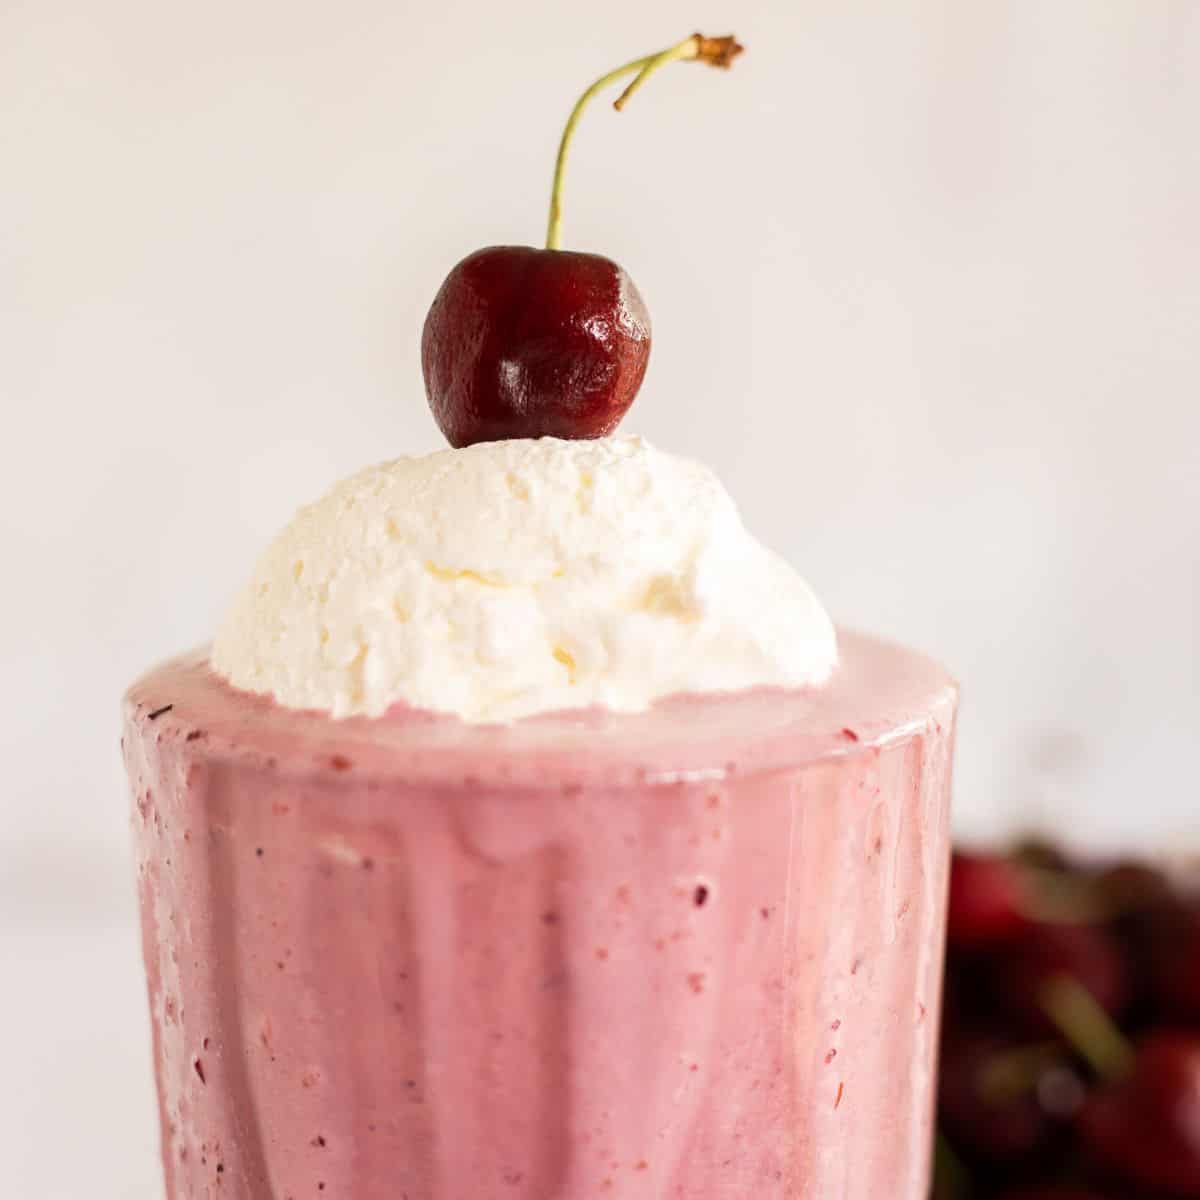 cherry milkshake in a glass topped with whipped cream and a fresh cherry.